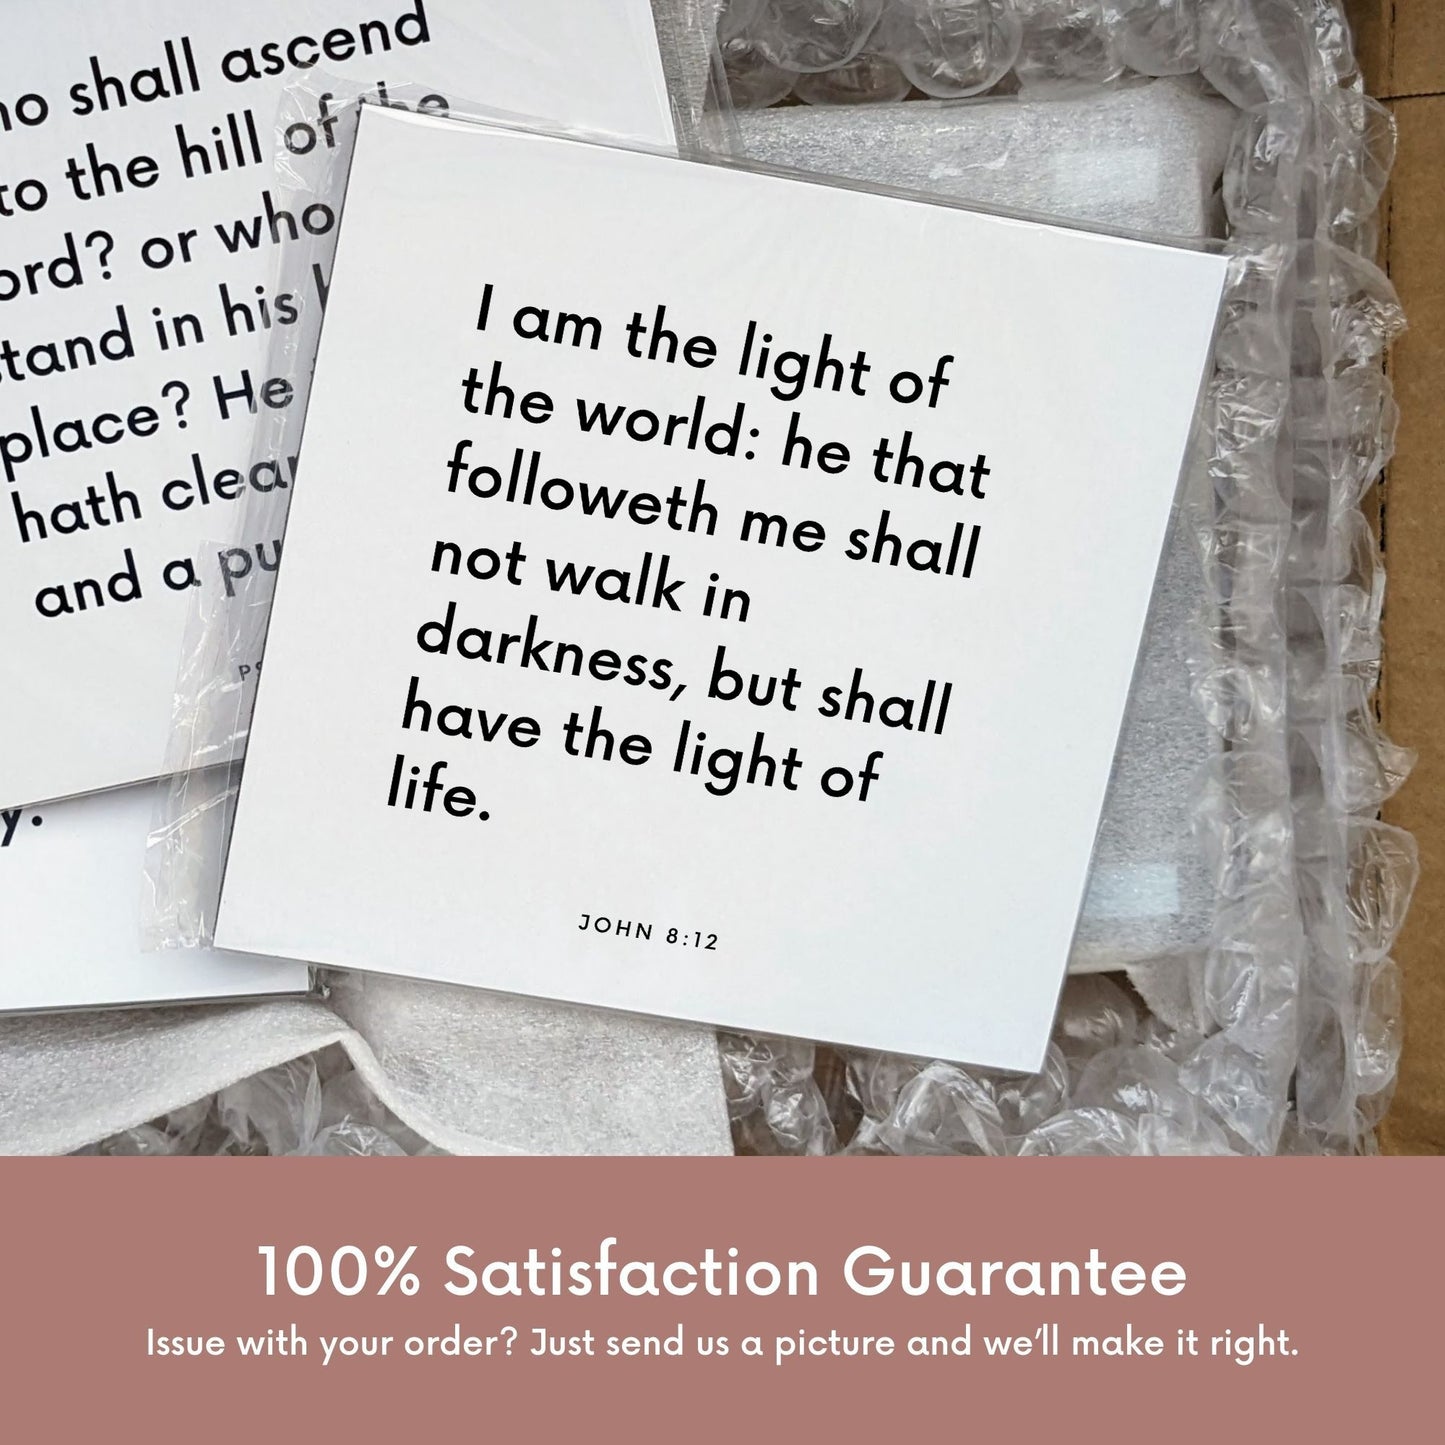 Shipping materials for scripture tile of John 8:12 - "I am the light of the world"